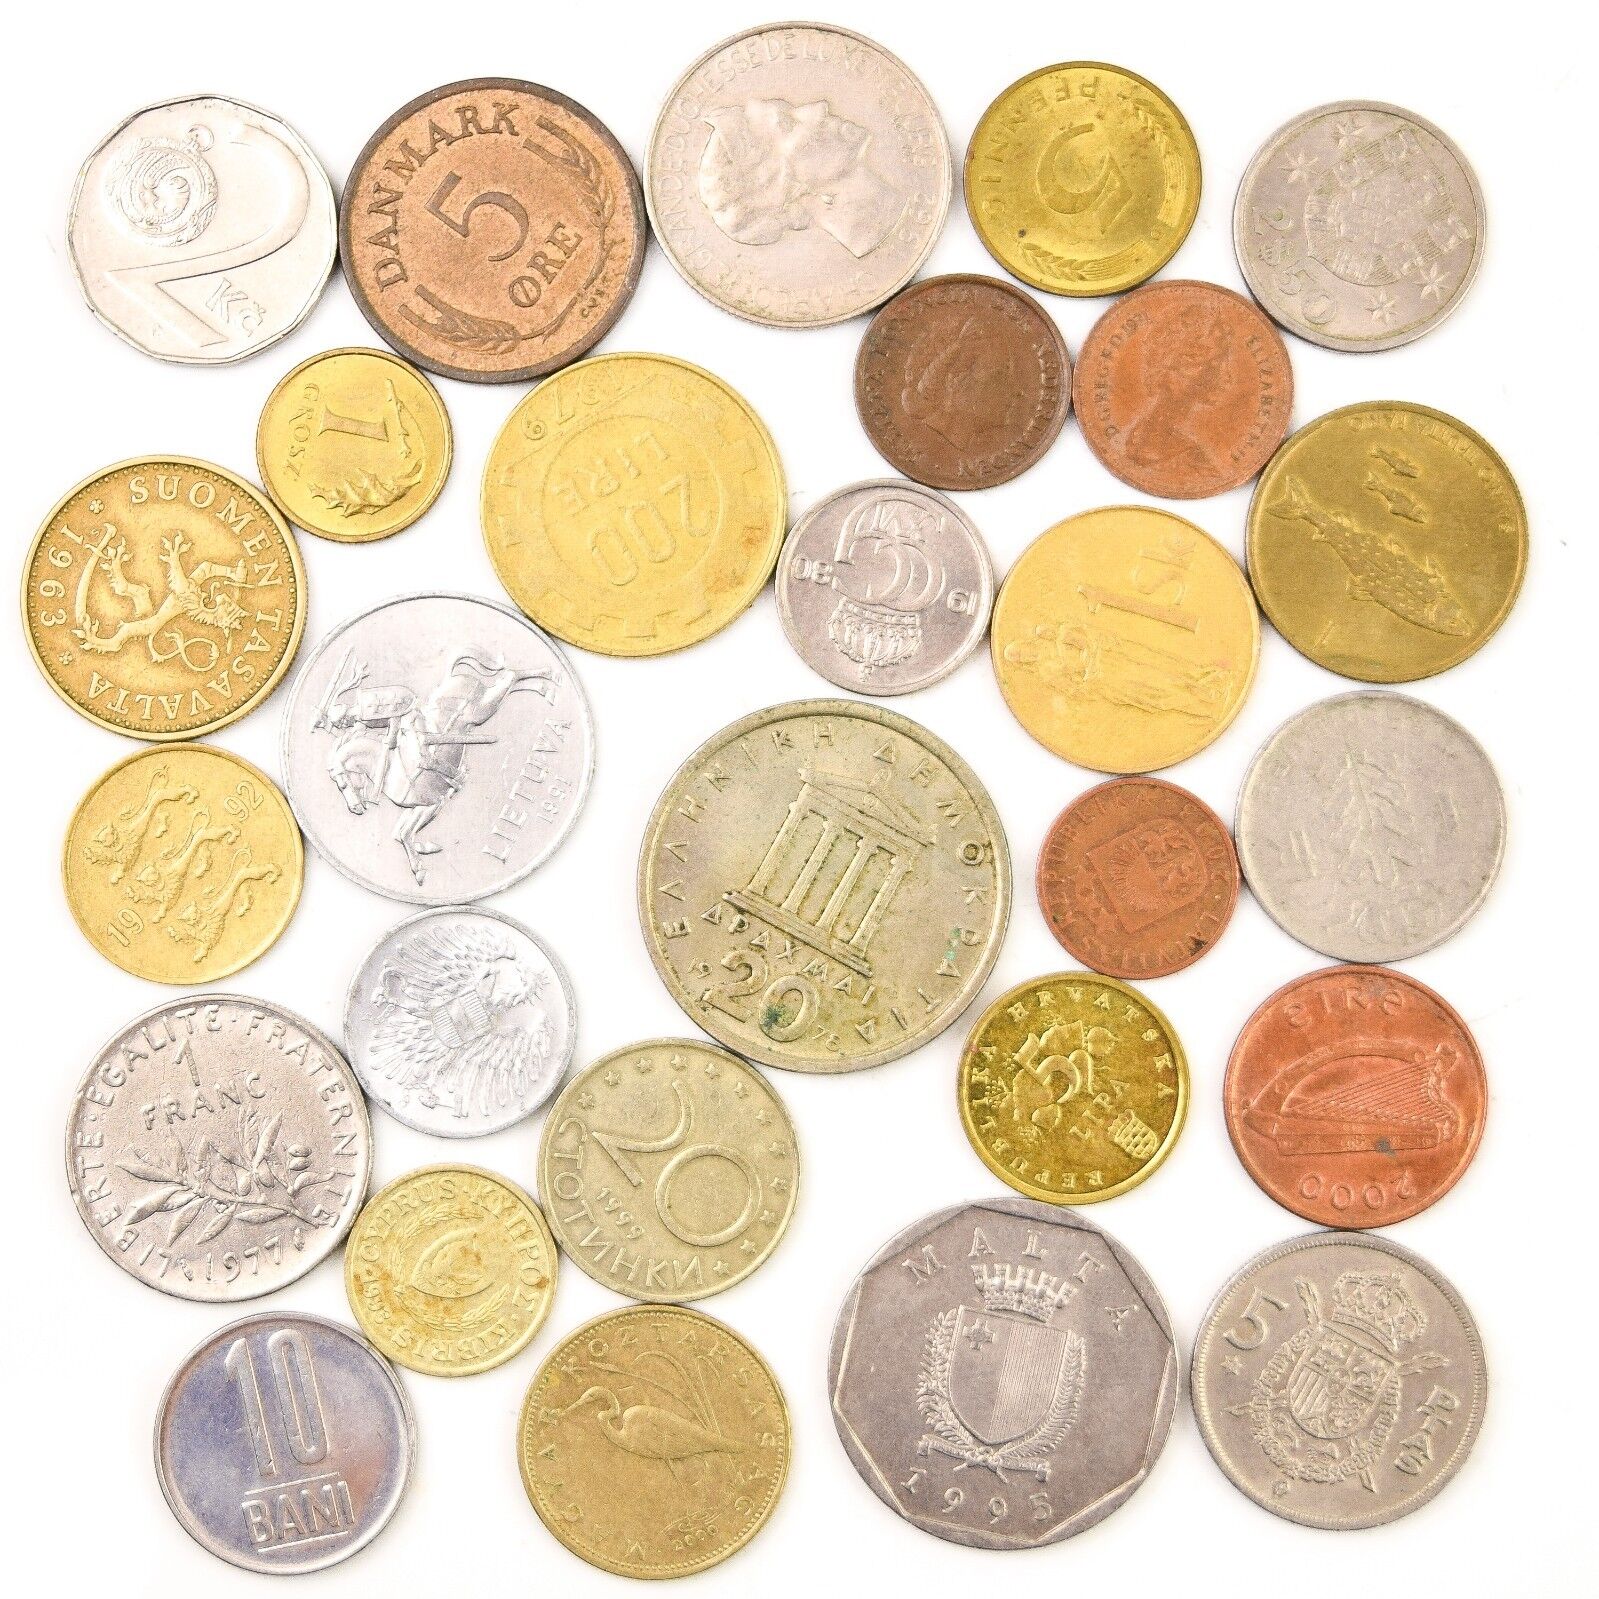 LOT OF 28 DIFFERENT COINS FROM EACH EUROPEAN UNION COUNTRY (PRE-EURO COLLECTION) Без бренда - фотография #9